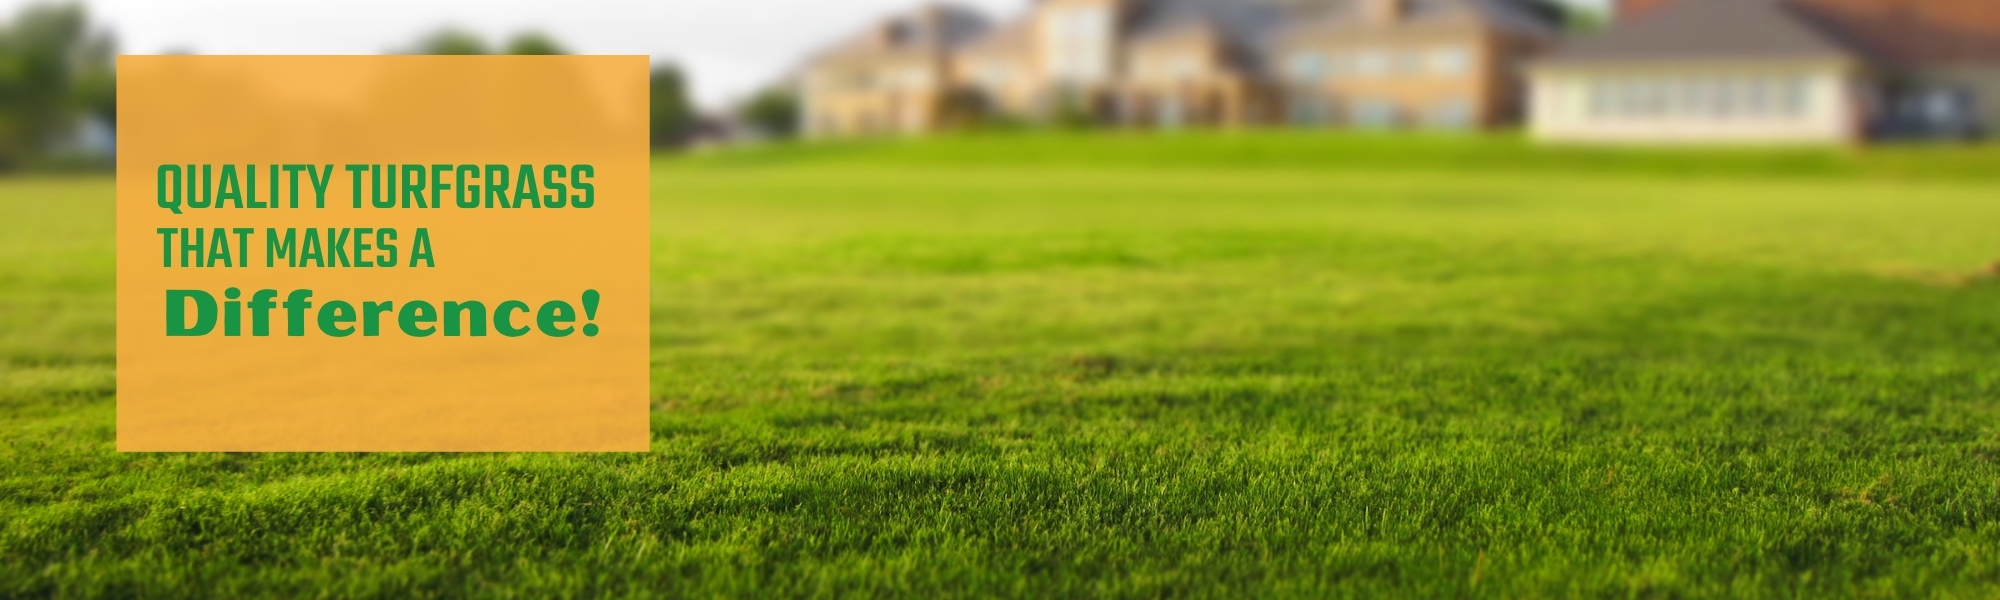 beautiful green lawn - quality Turfgrass that makes a difference 